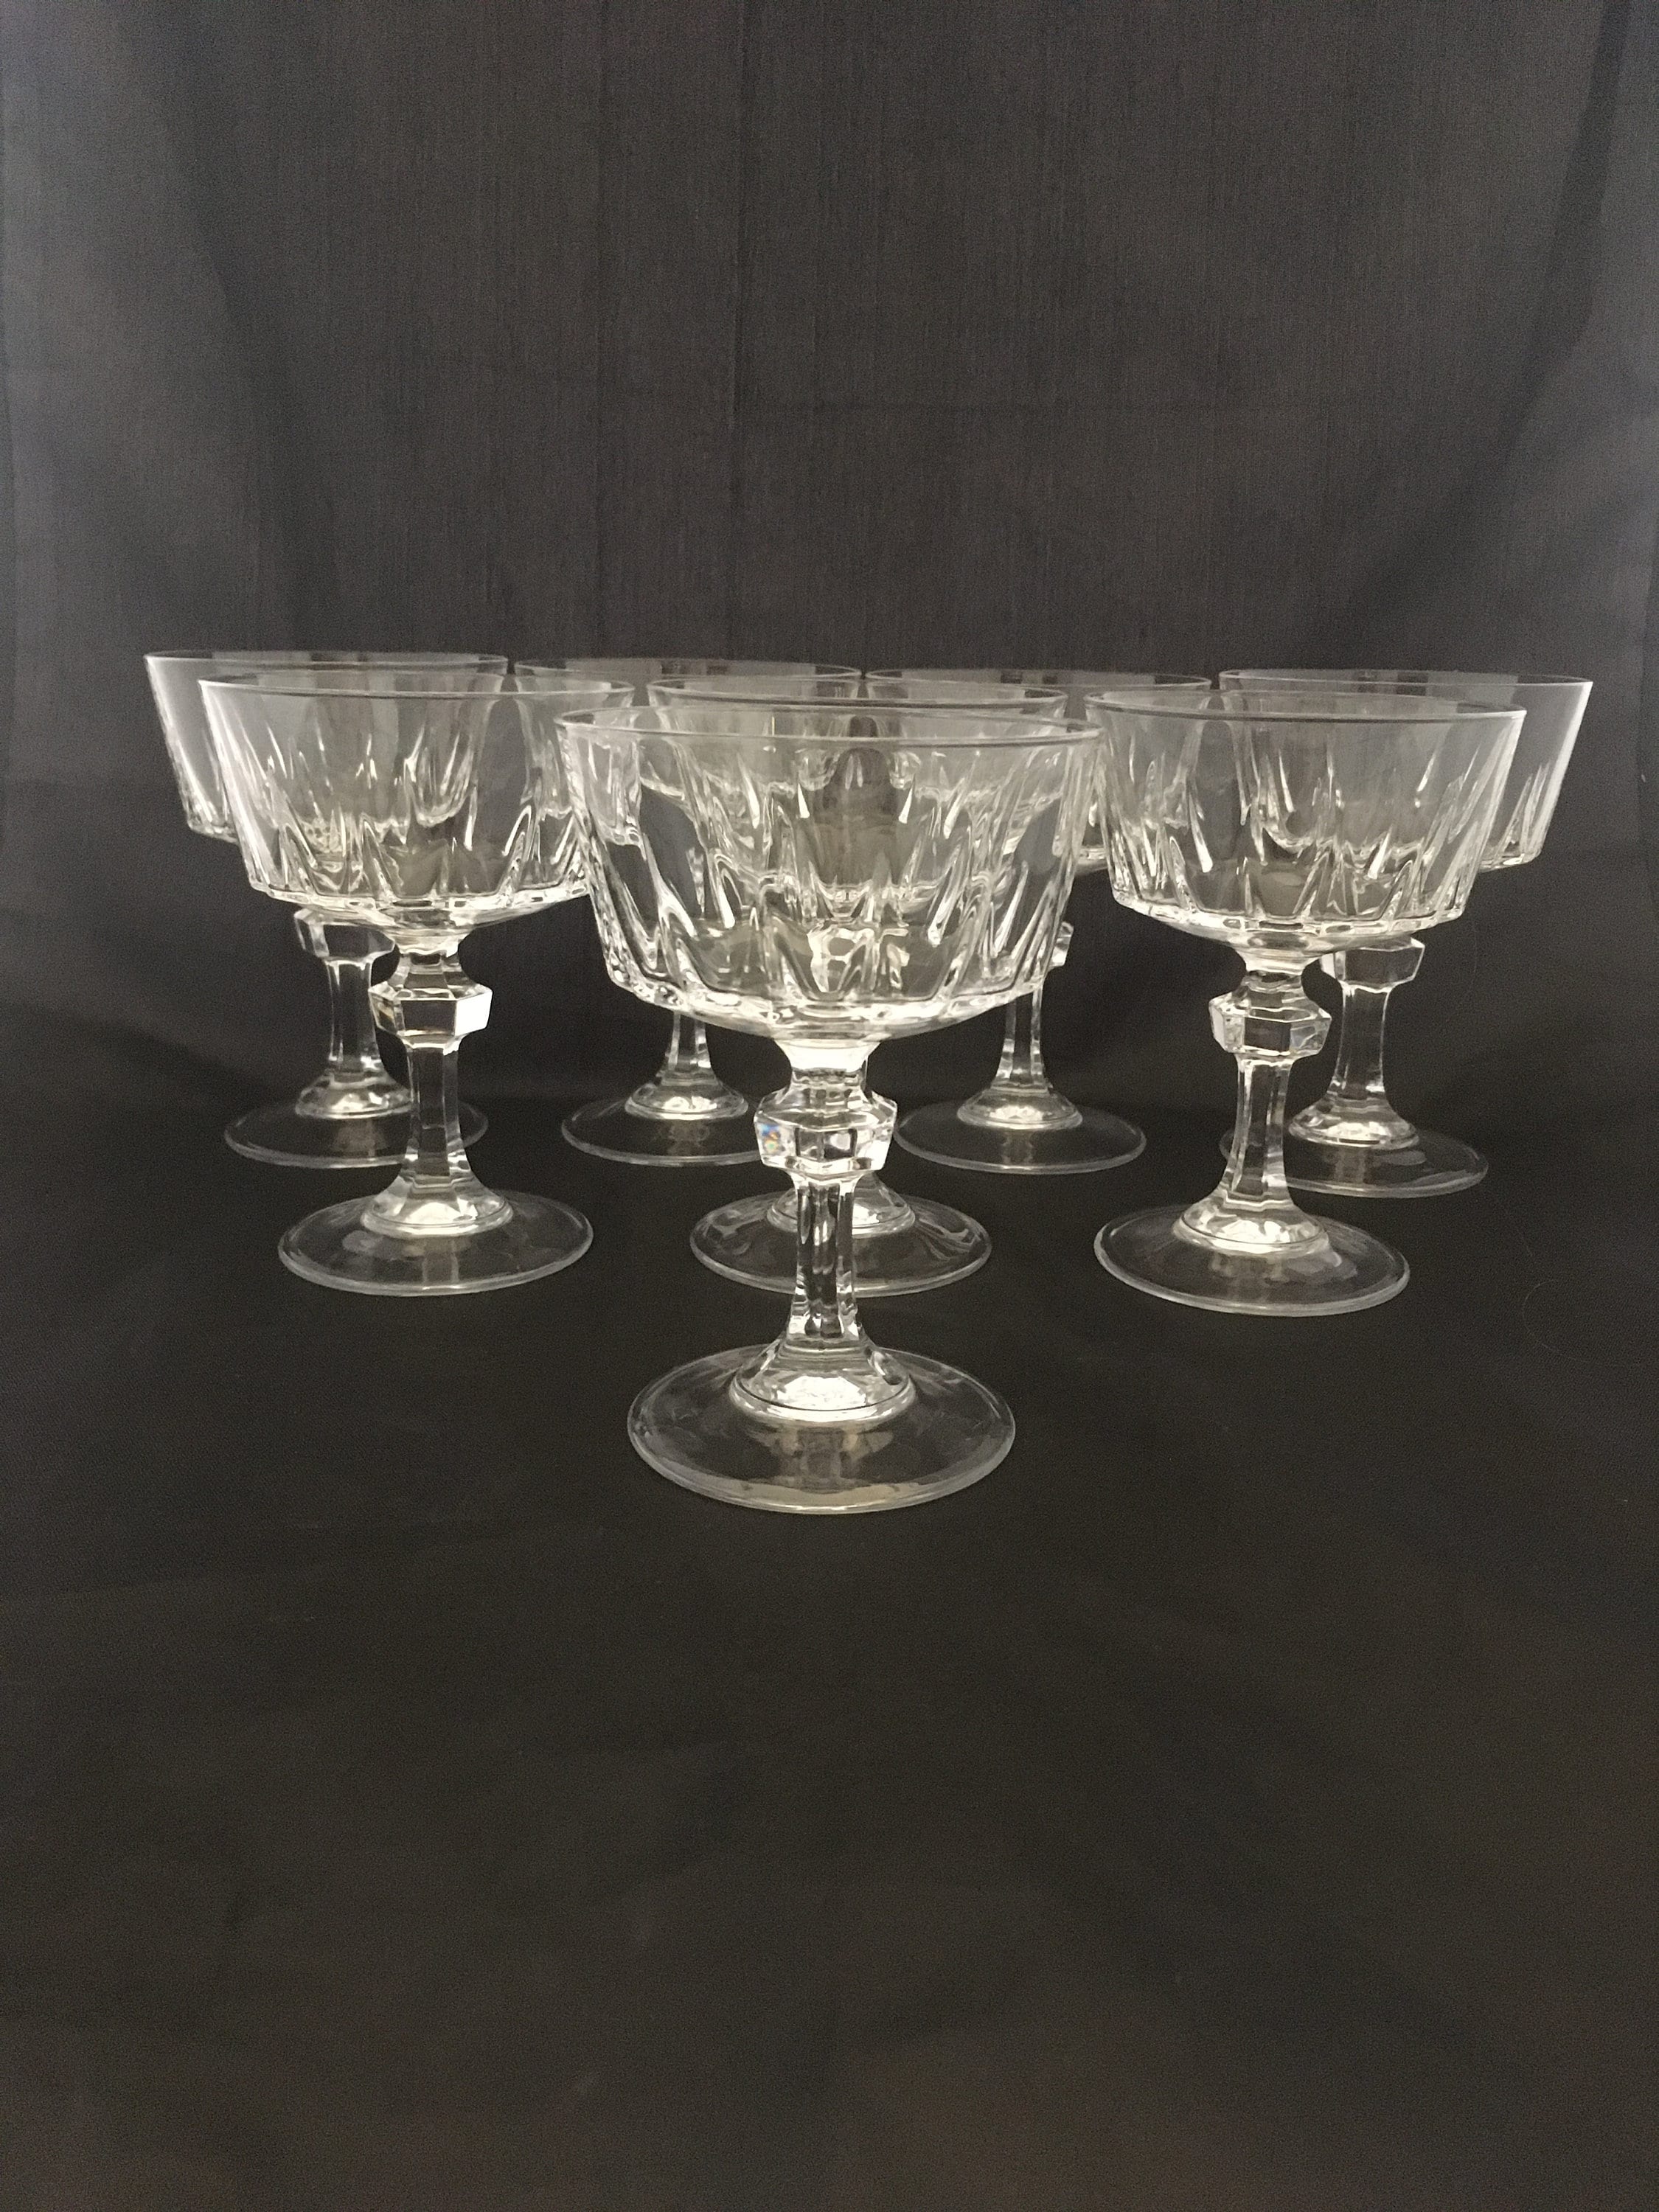 Vintage Art Deco Coupe Glasses | Set of 4 | 7 oz Classic Cocktail Glassware  for Champagne, Martini, …See more Vintage Art Deco Coupe Glasses | Set of